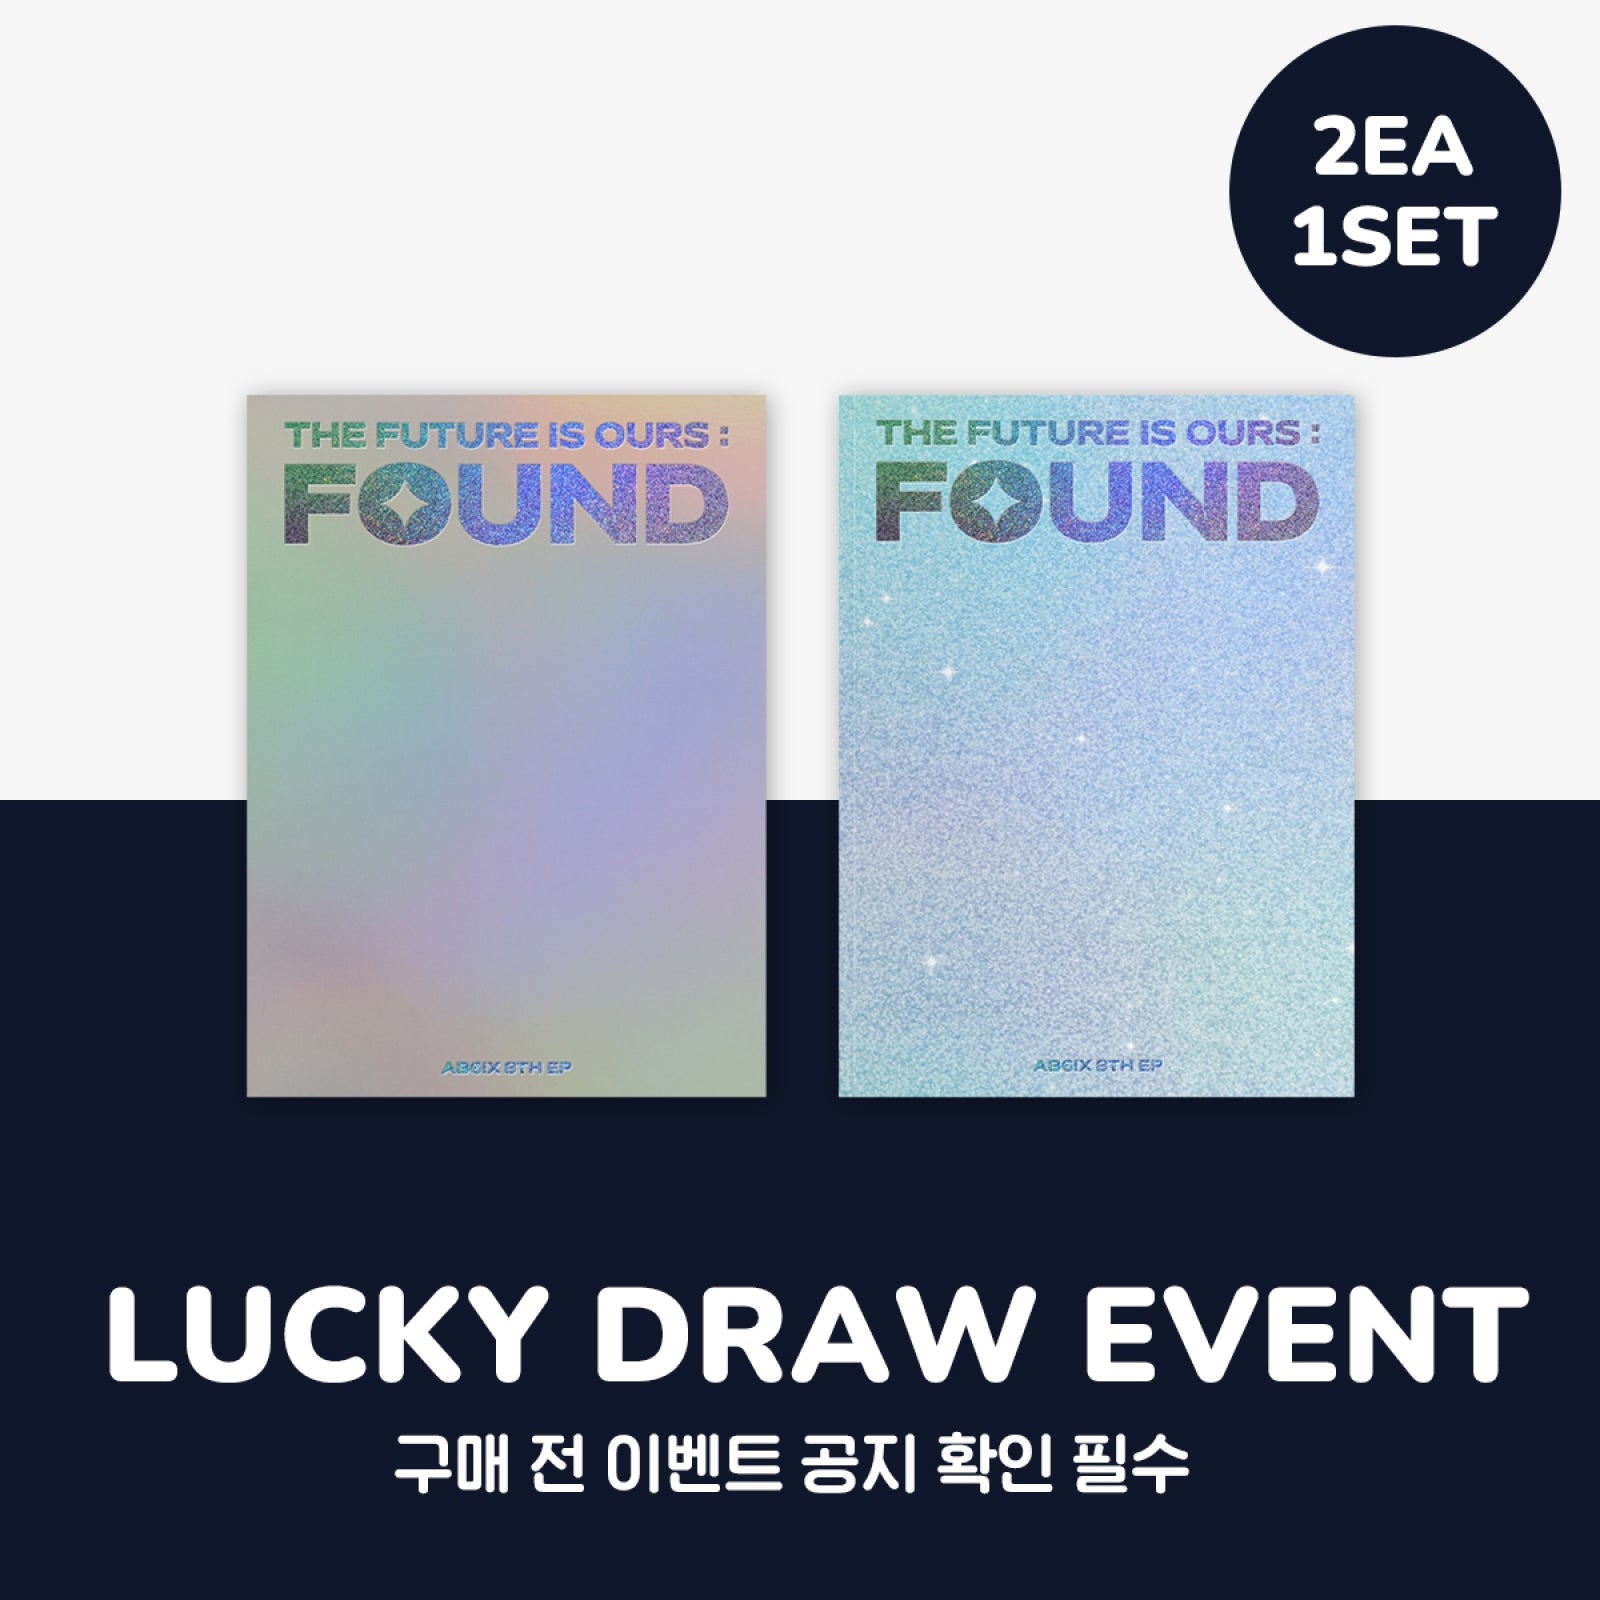 AB6IX - THE FUTURE IS OURS: FOUND 8TH EP ALBUM WITHMUU LUCKY DRAW EVENT SET - COKODIVE